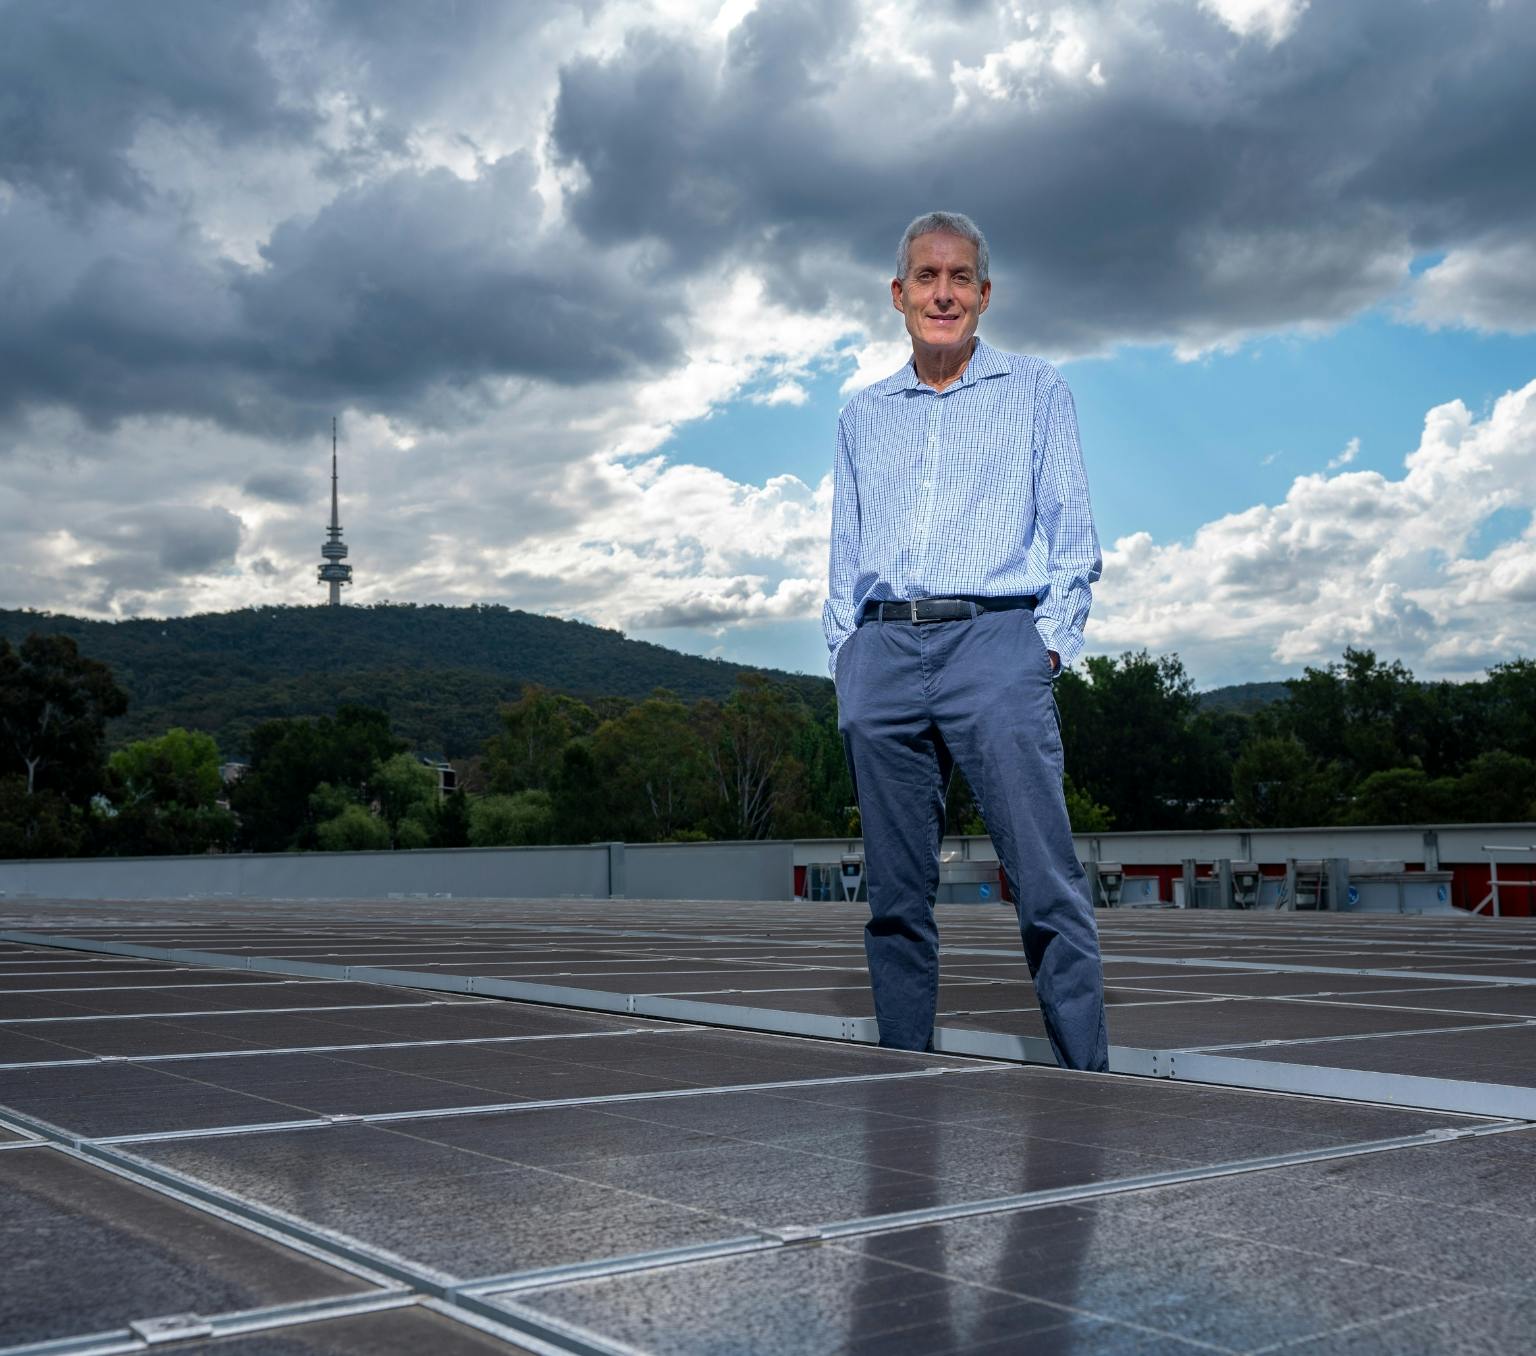 Professor Andrew Blakers standing next to solar panels. He is wearing a blue shirt and he has his hands in his pockets.